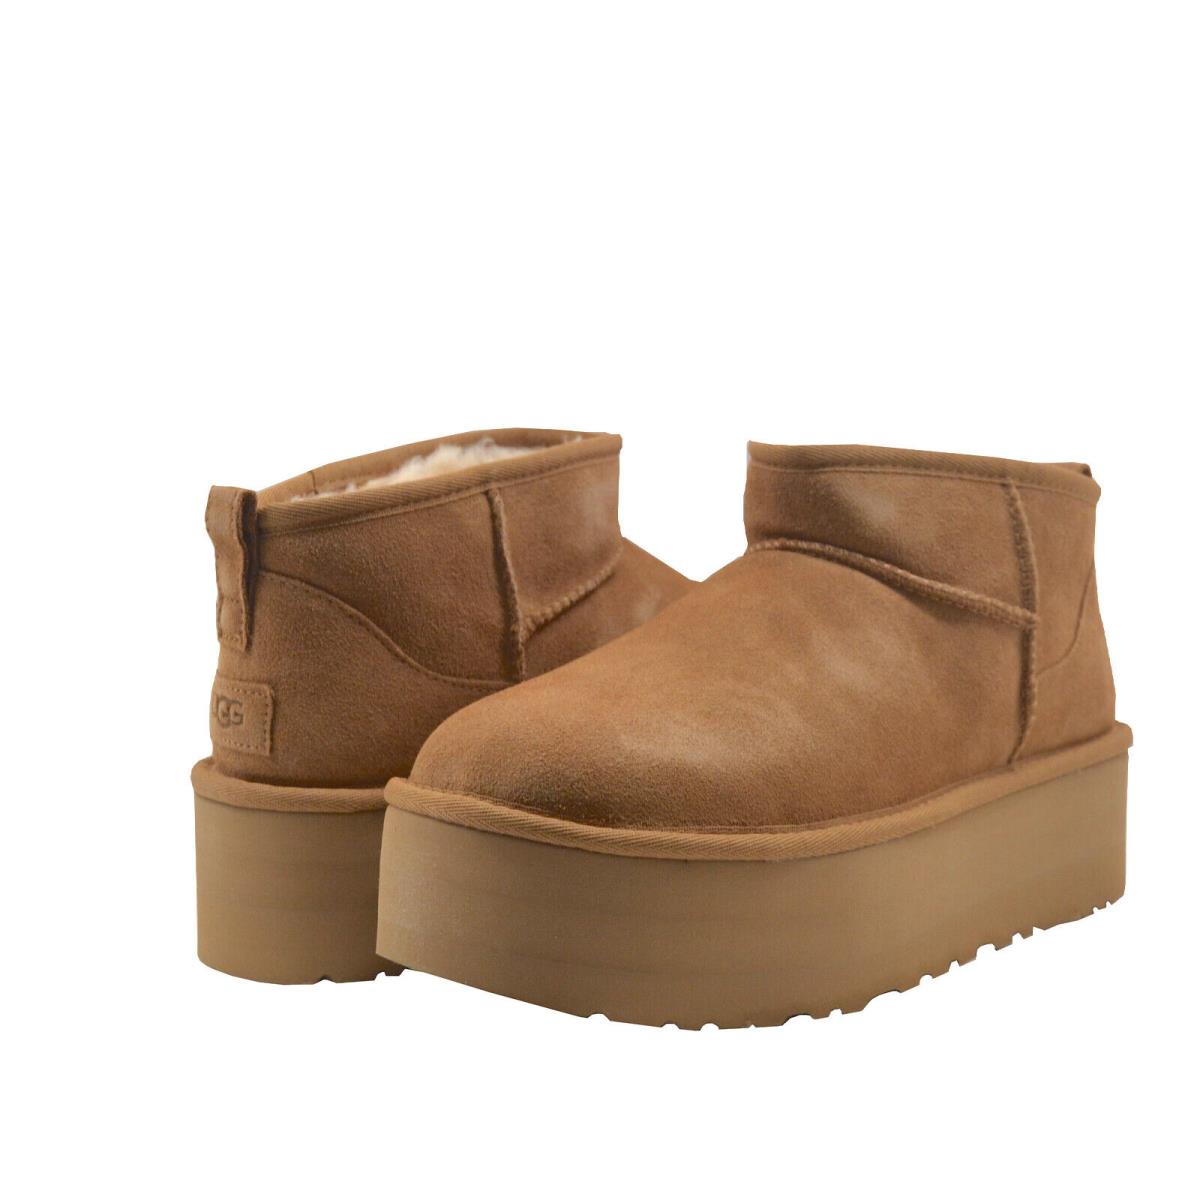 Women`s Shoes Ugg Classic Ultra Mini Platform Ankle Boots 1135092 Chestnut - Brown